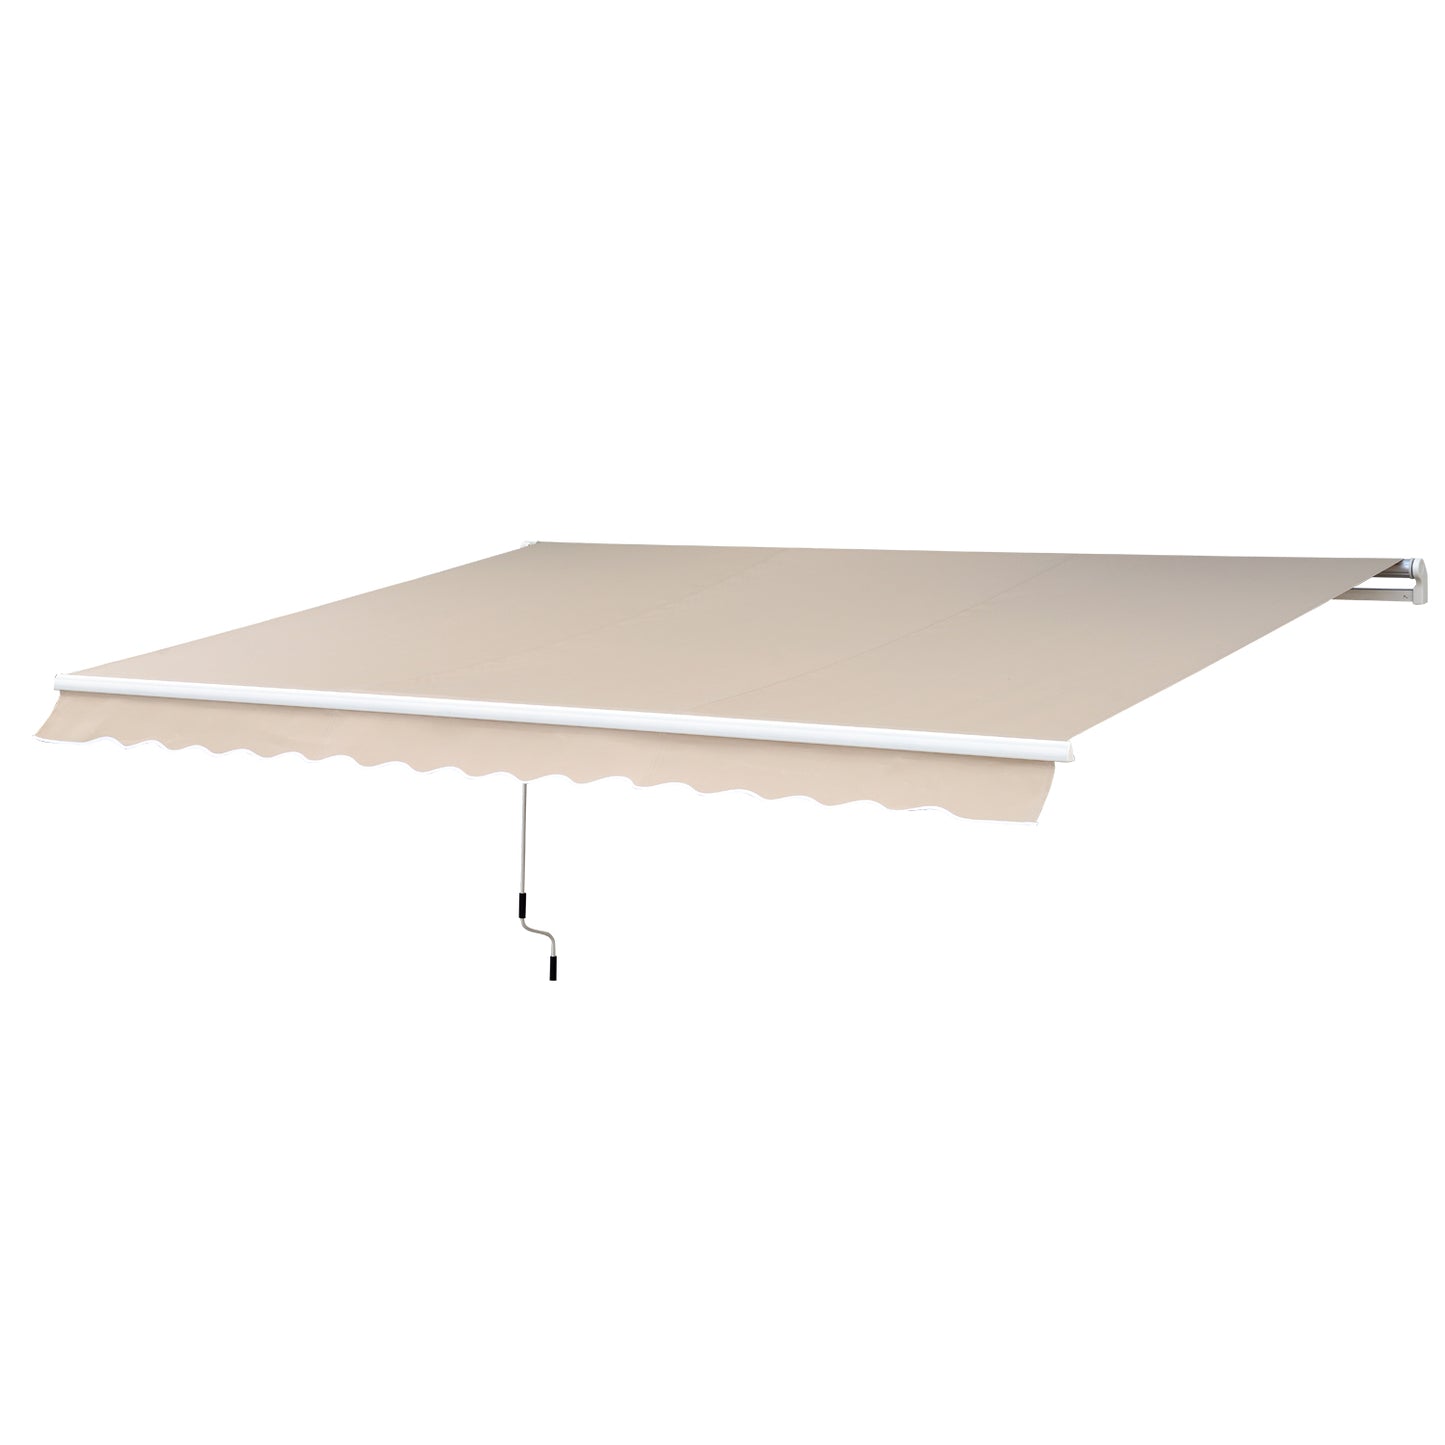 Outsunny Manual Retractable Awning, 3x2.5 m-Ivory White